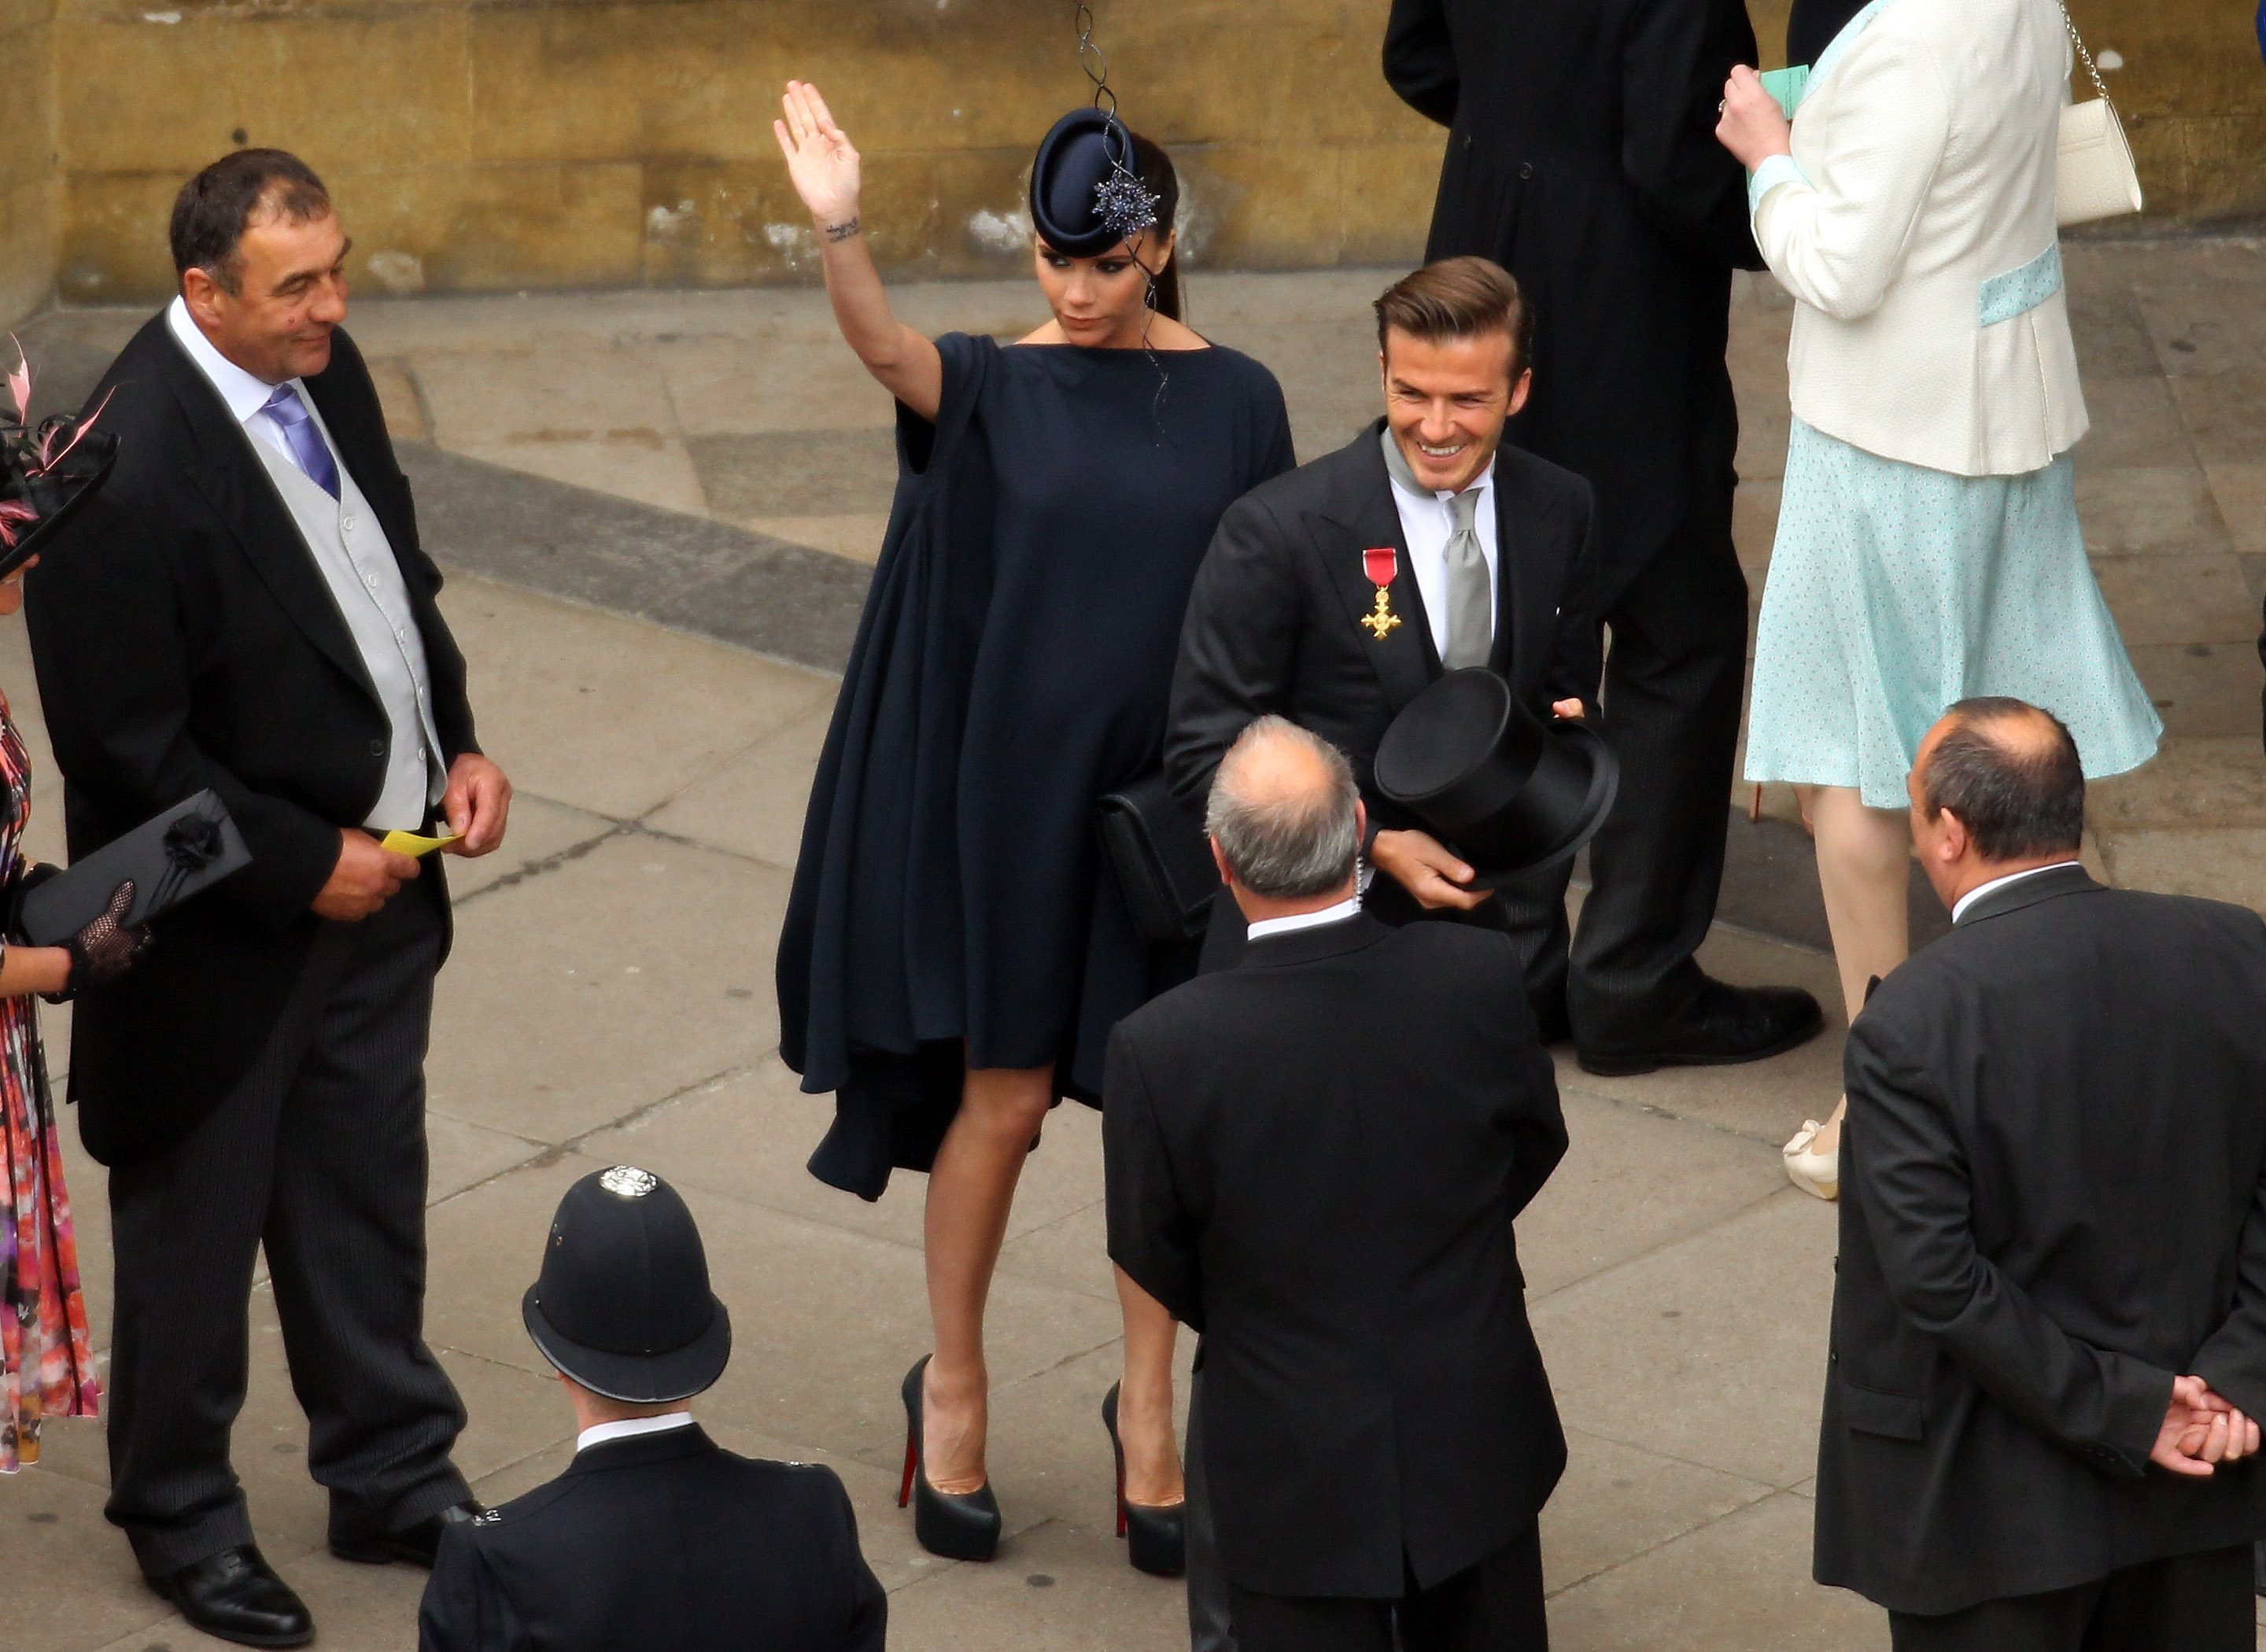 David and Victoria Beckham arrive for the Royal Wedding of Prince William to Catherine Middleton at Westminster Abbey on April 29, 2011 in London, England. (Clive Rose/GP—Getty Images)